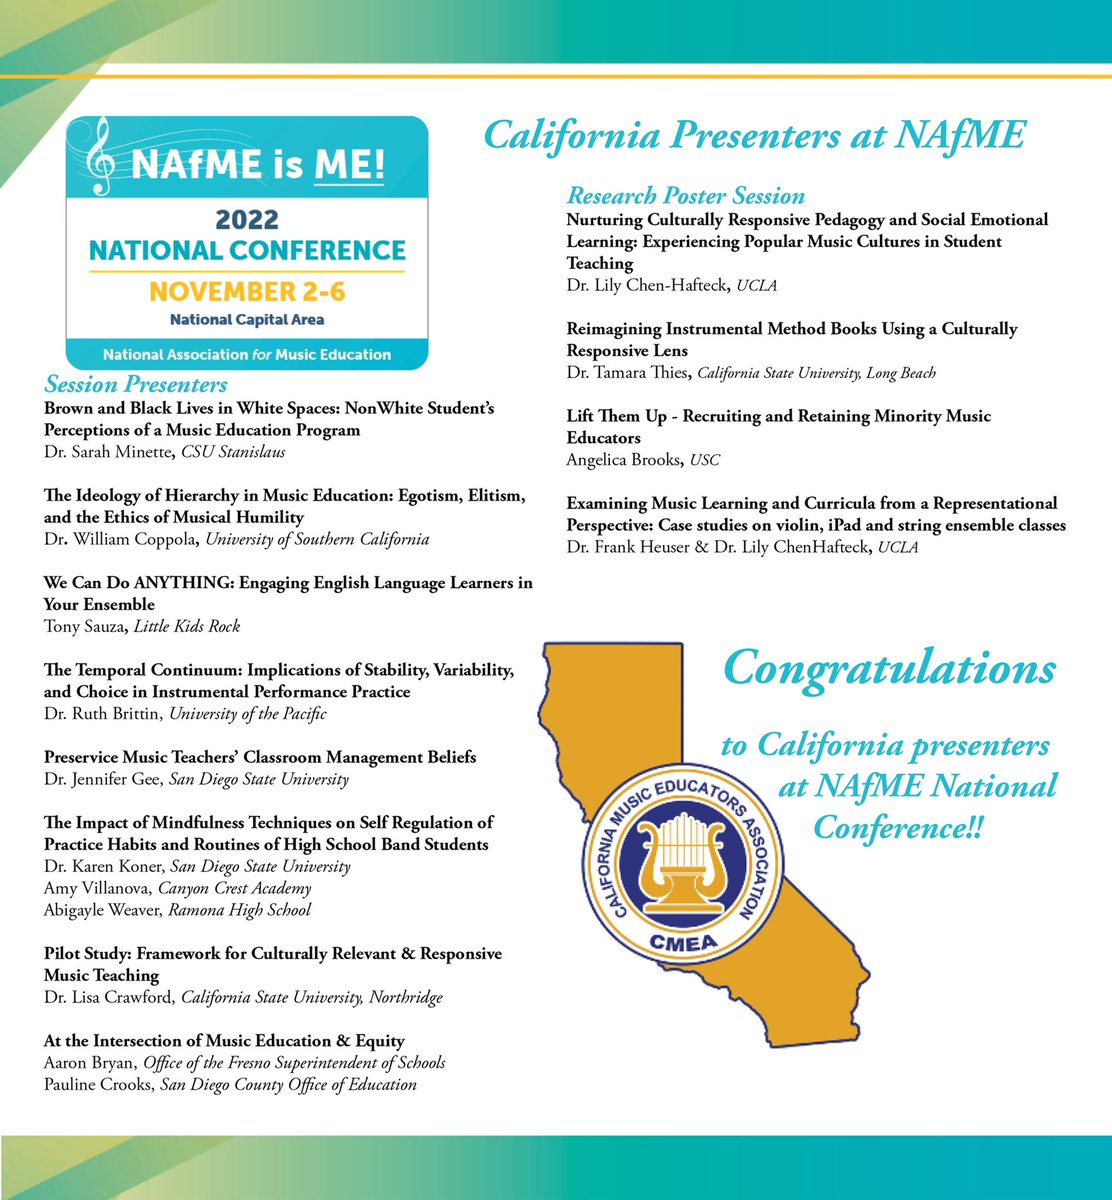 Congratulations to the @CMEA_CalMusicEd presenters sharing at the @NAfME #NAfME2022 conference! #musiceducation